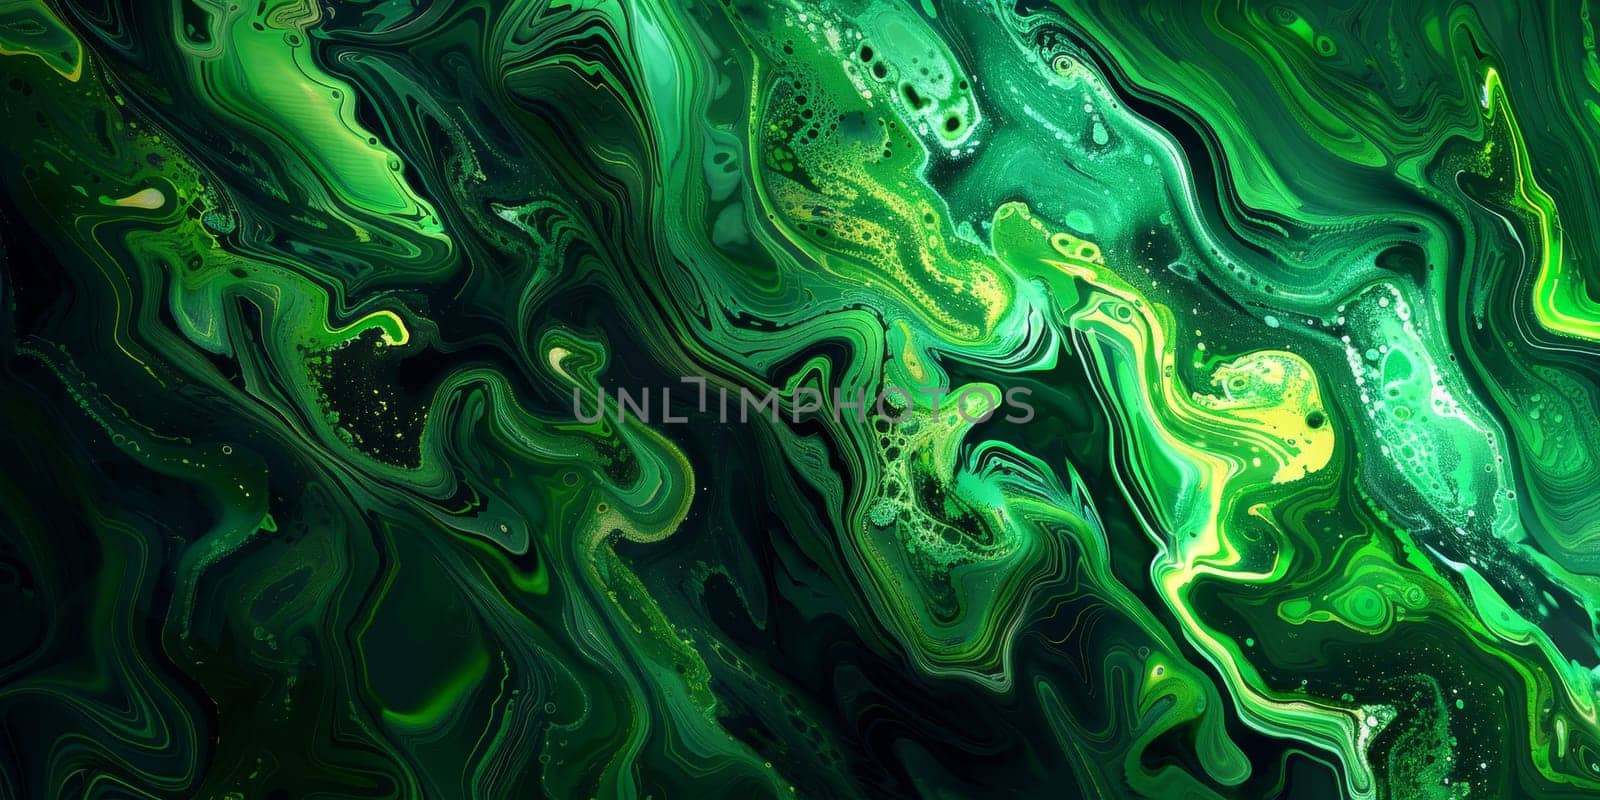 Green and black swirls and shapes in an abstract painting